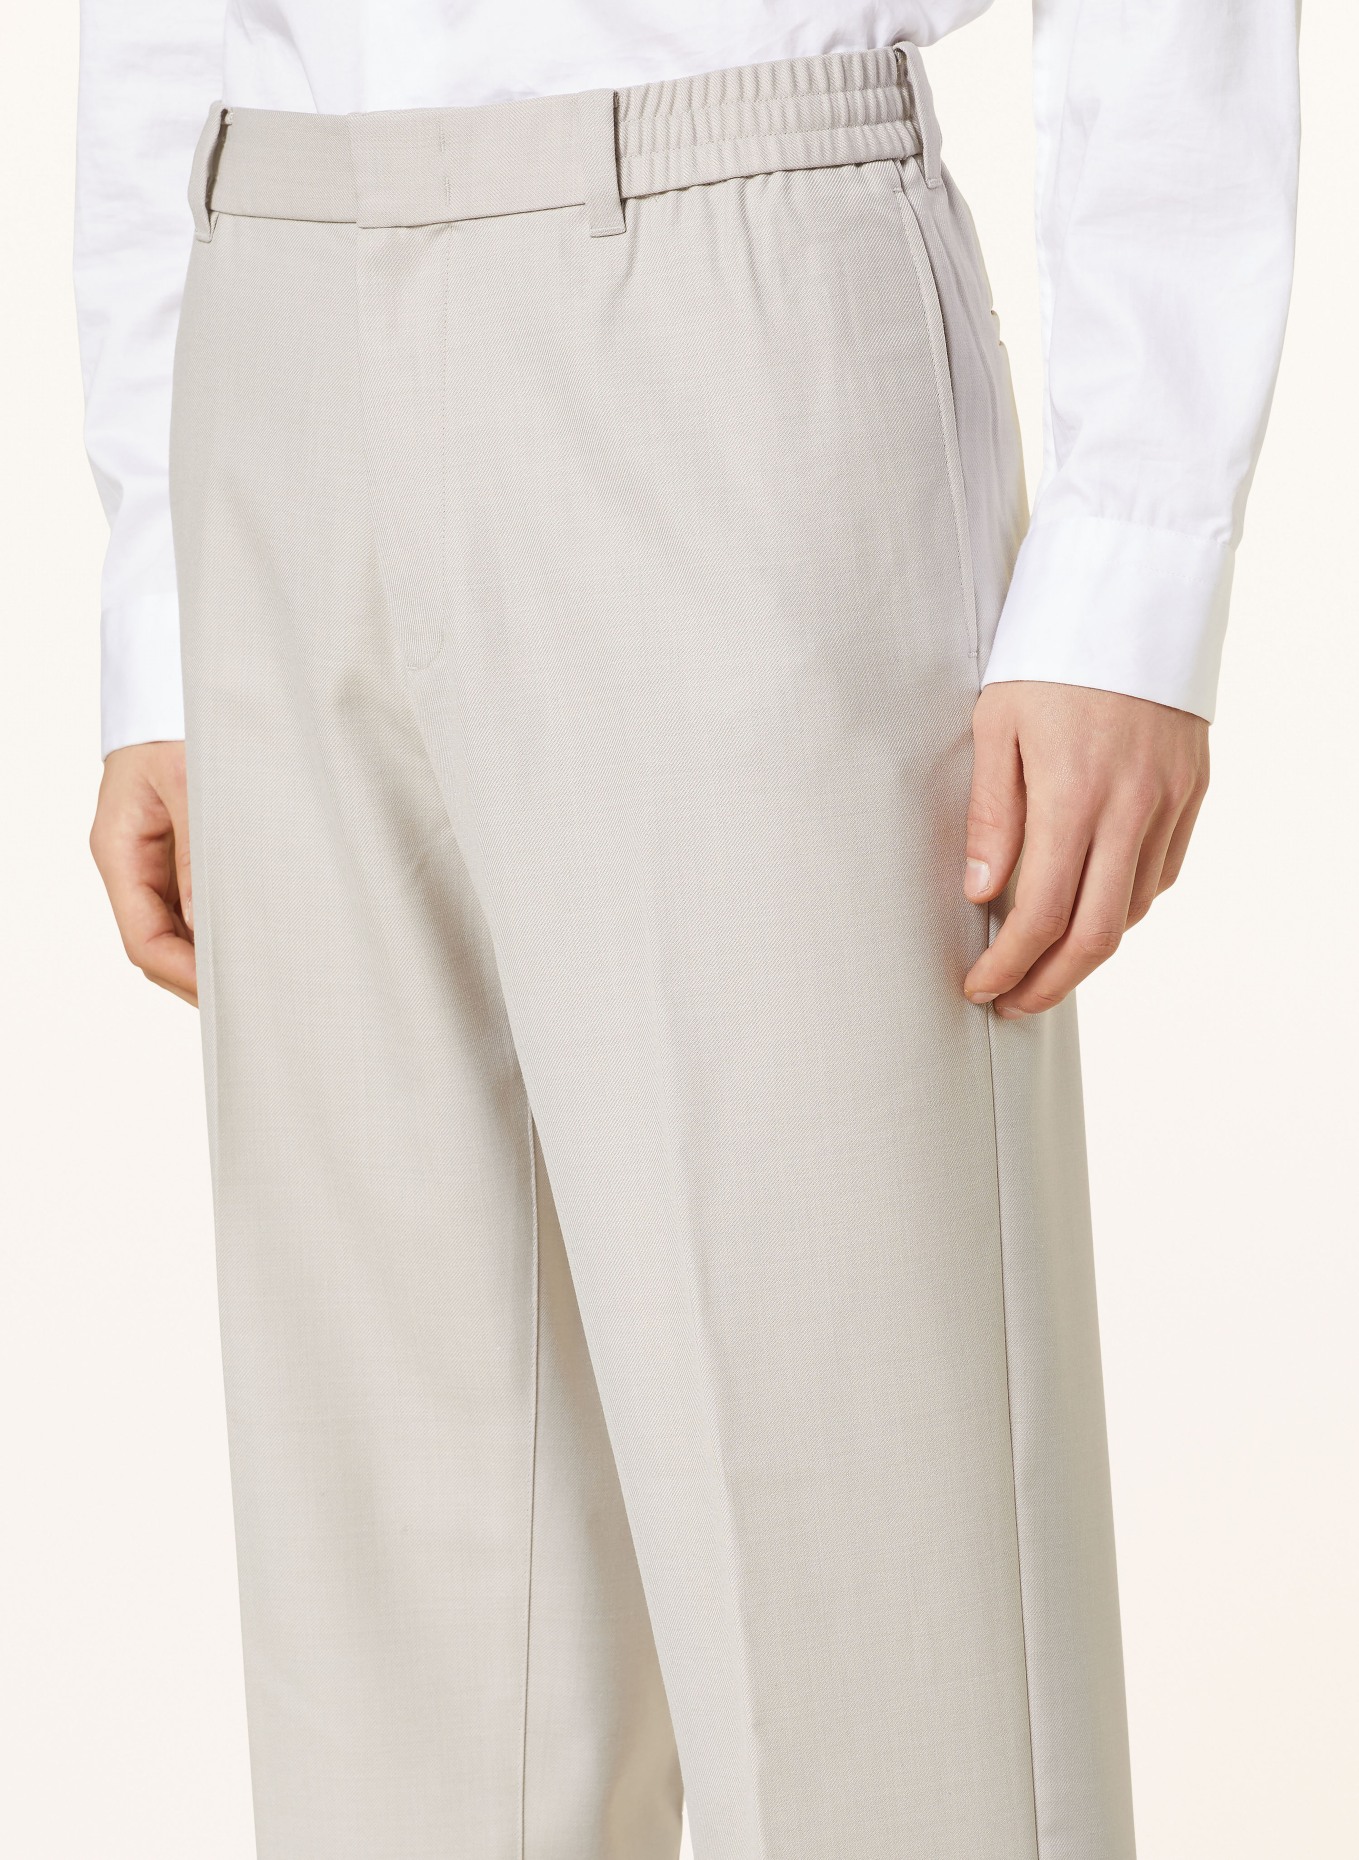 COS Trousers in jogger style relaxed straight fit, Color: LIGHT GRAY (Image 5)